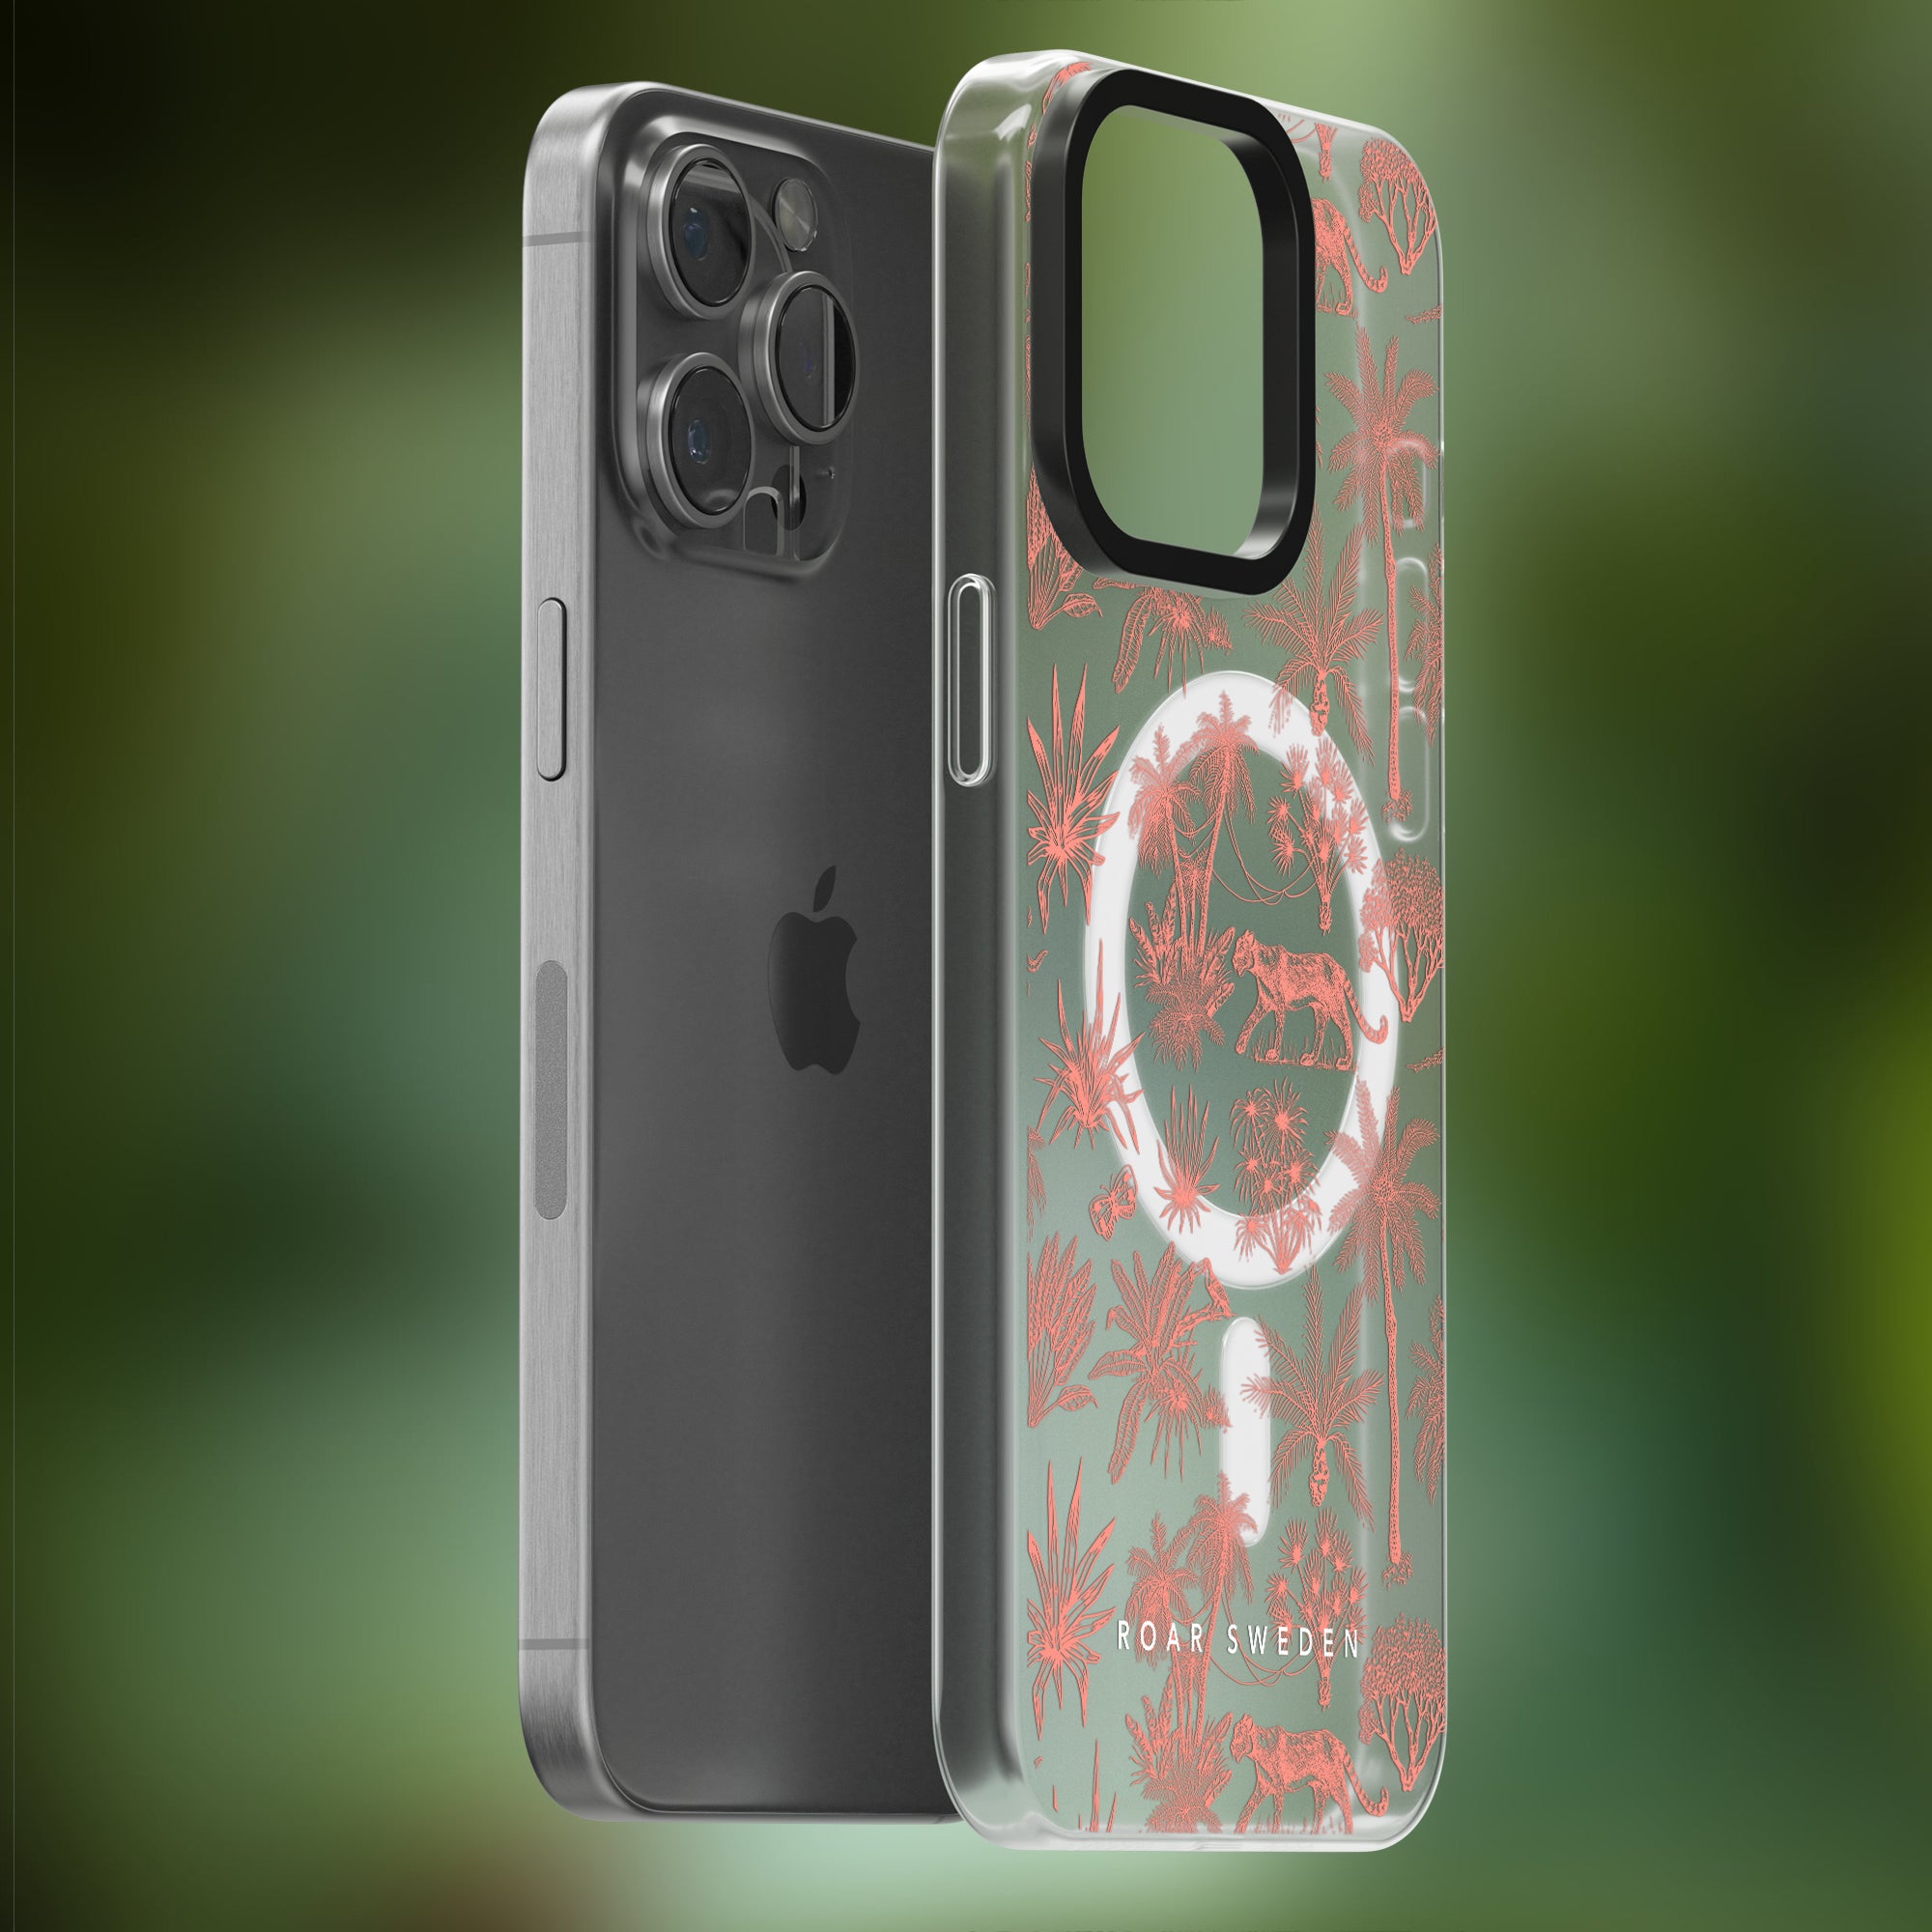 Two iPhone models are shown from the back side by side. One is without a case and the other is in a transparent Toile De Jouy Coral - MagSafe Case with a red floral and animal pattern.